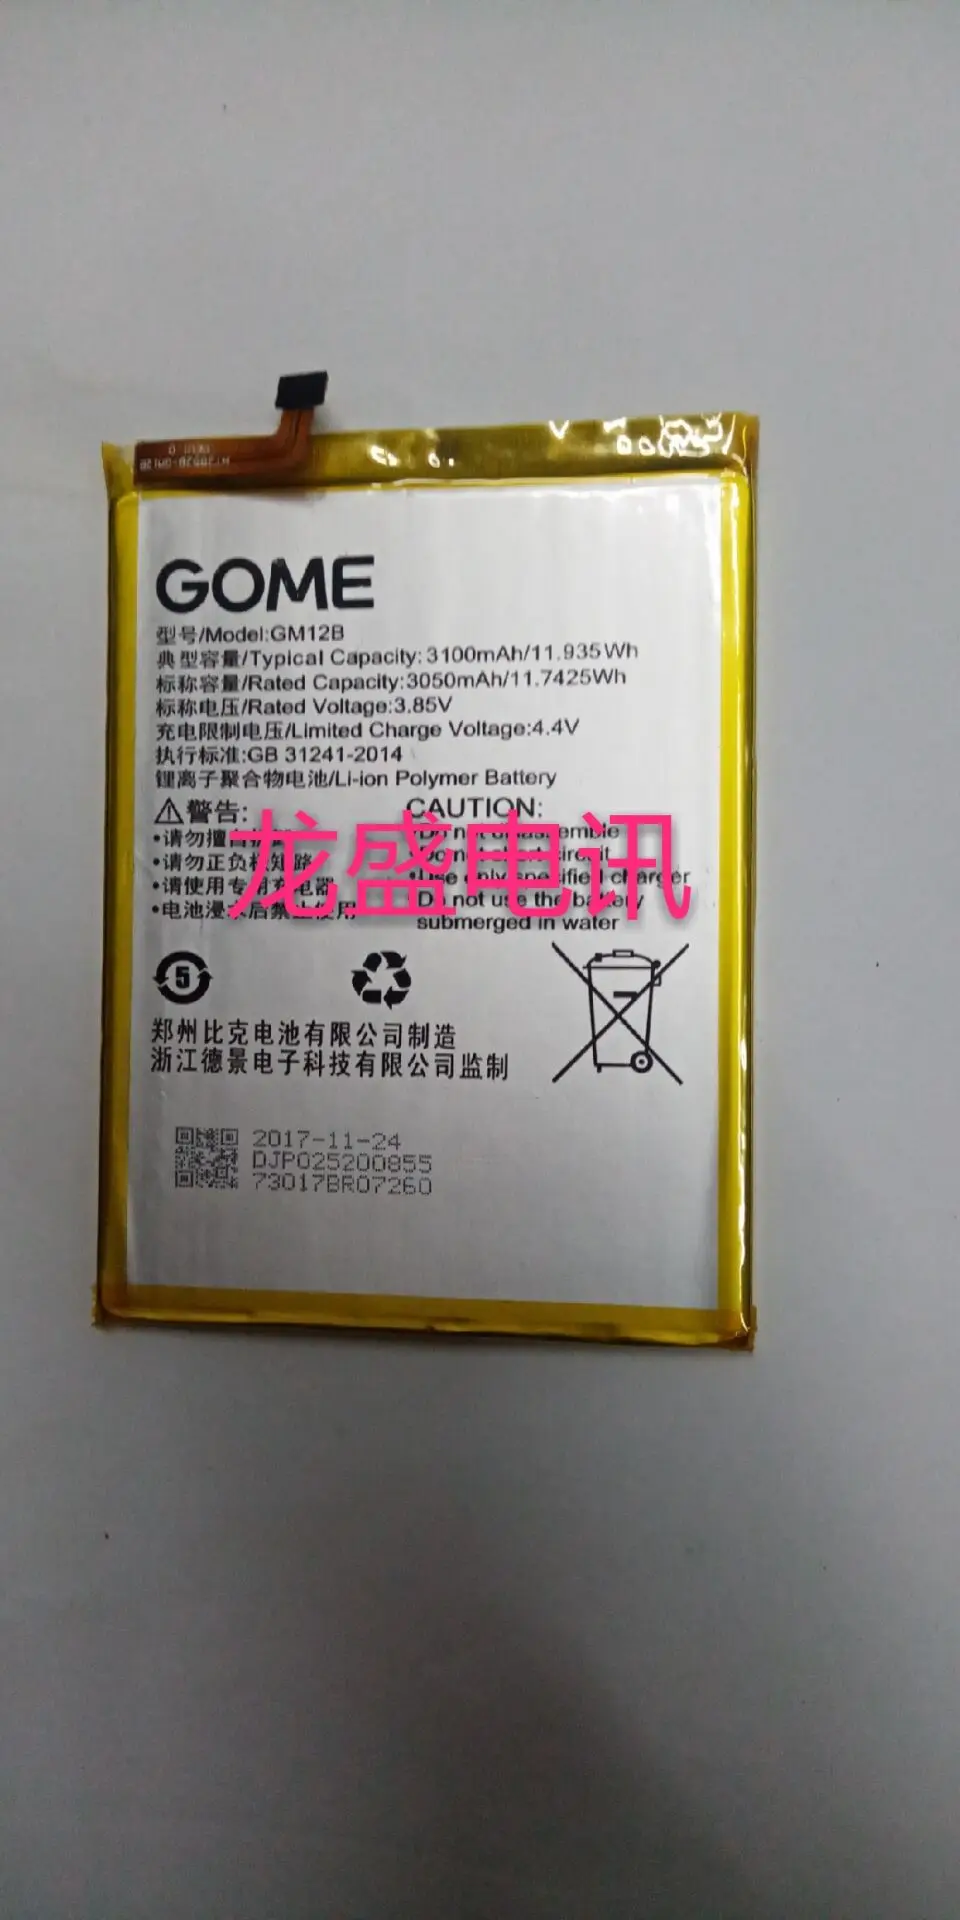 

GND 3100mAh/11.935Wh GM12B Replacement Battery For GOME U7 smartphone Built-in Li-ion bateria Li-Polymer Batterie